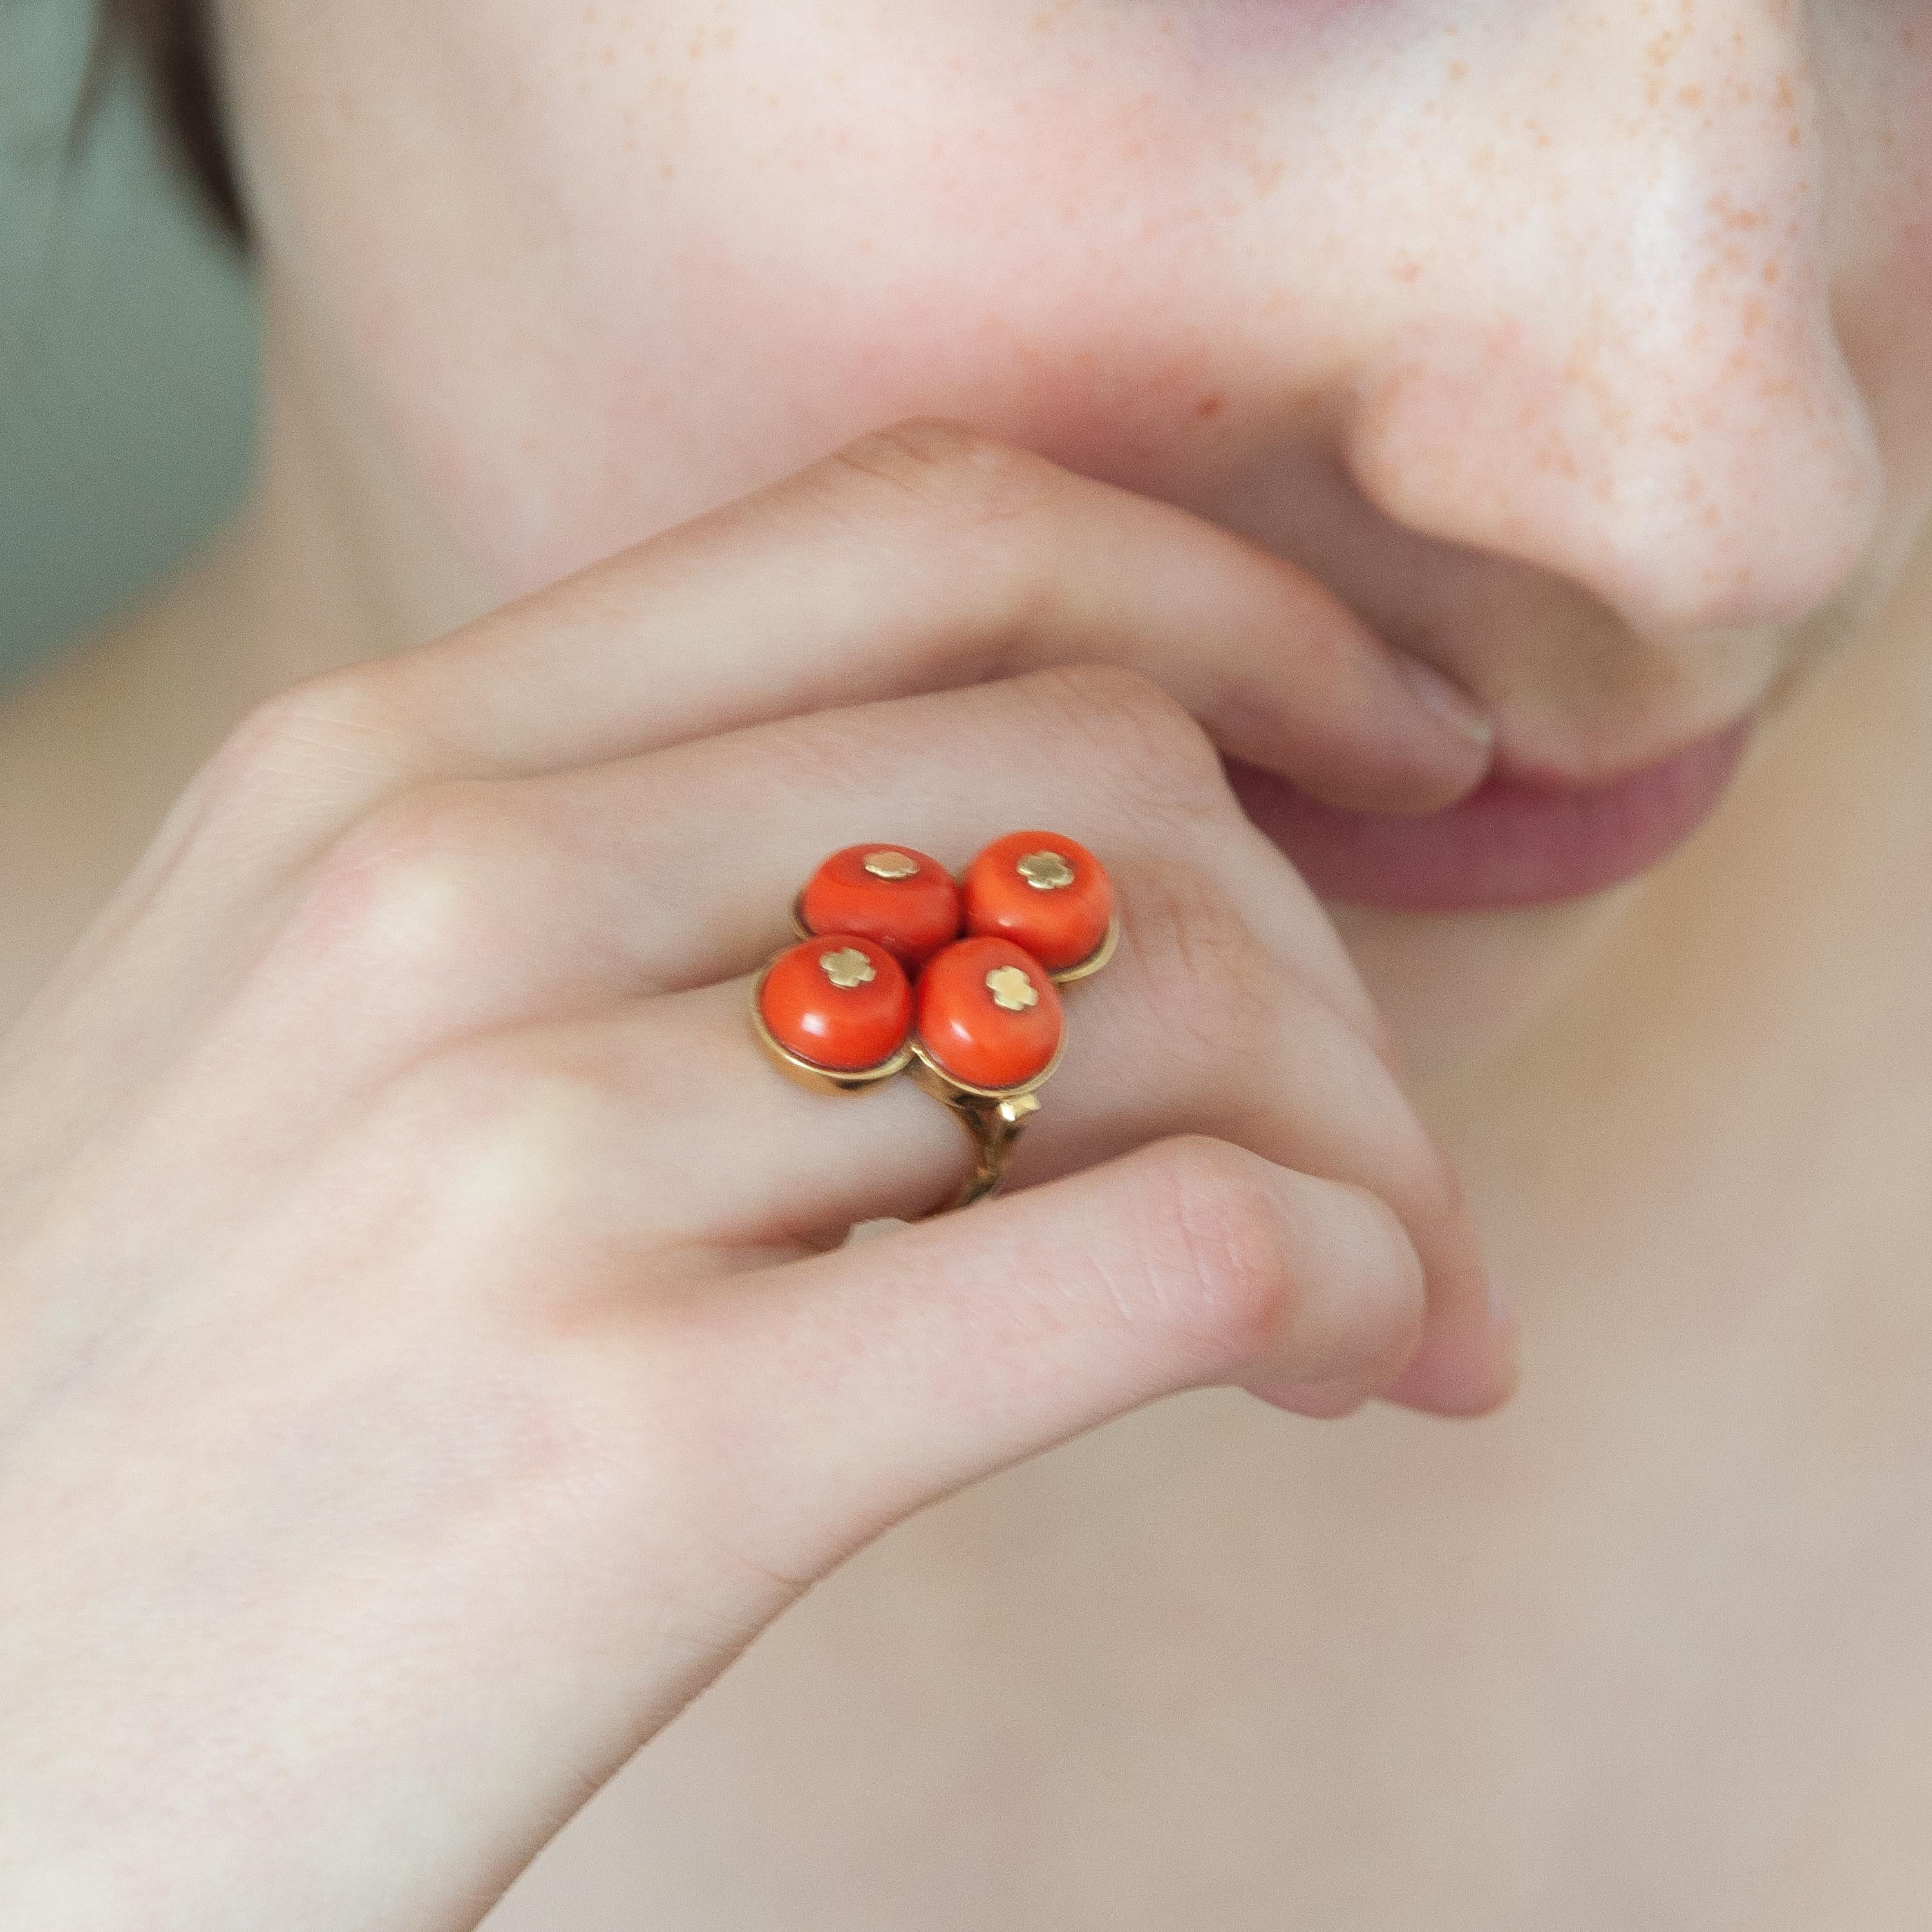 A vintage jewelry set of natural coral featuring a ring and stud earrings. This set is created in 14 karat gold with beautifully natural coral bead stones. The corals have a gold cap on top to hold the bead at it's place. The corals are clustered